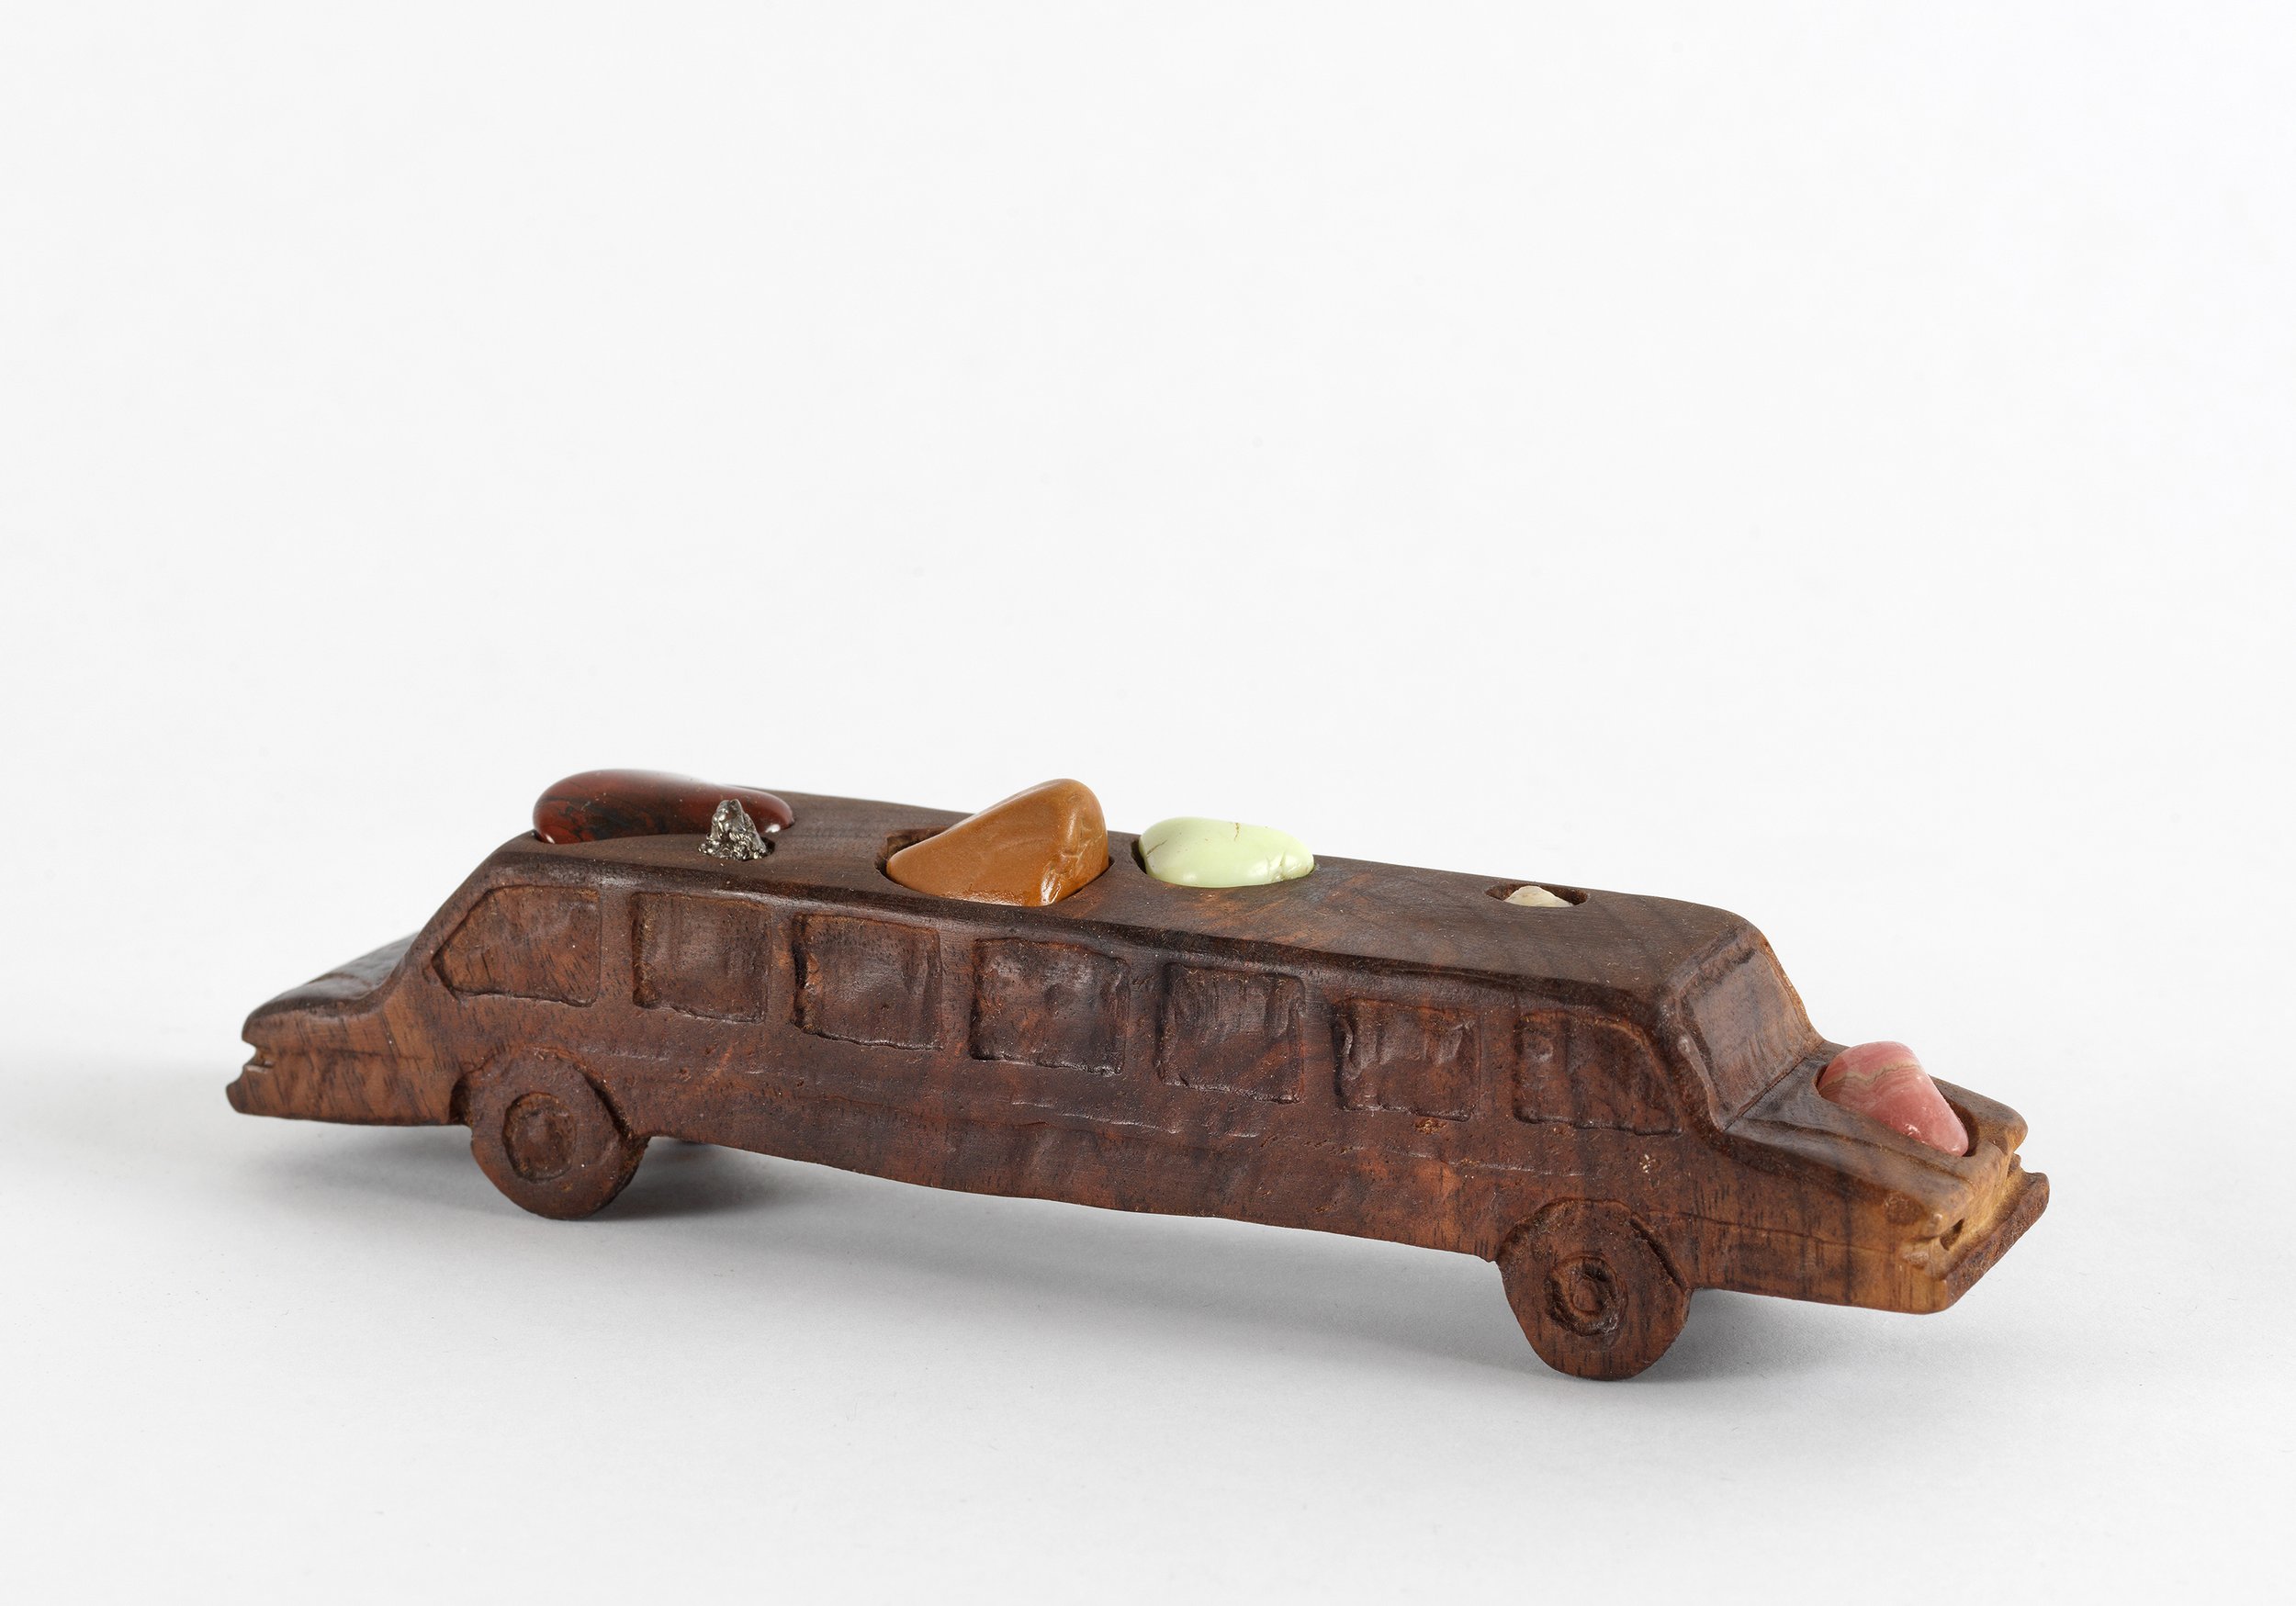   Limo , 2020, rocks, meteorite, and shell on carved walnut, 2” x 1.5” x 7” 